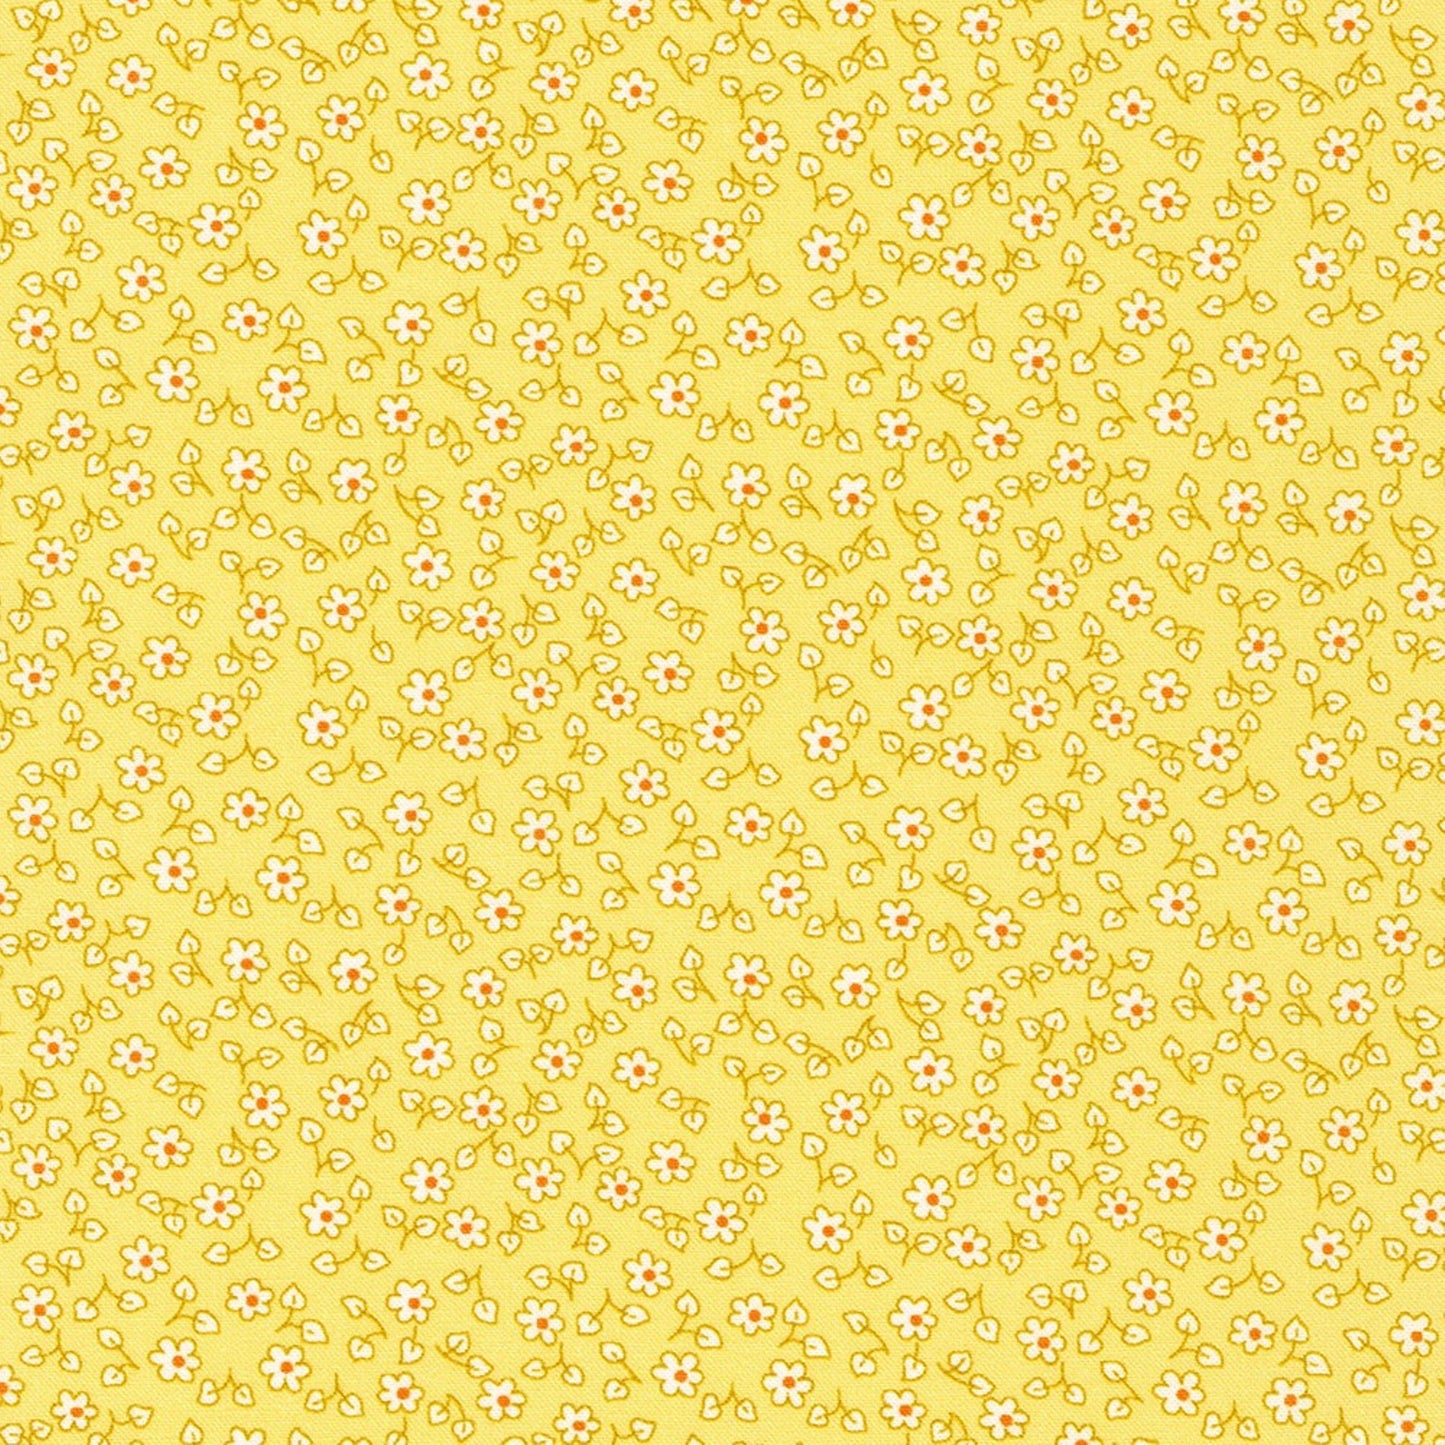 Little Blossoms Debbie Beaves 1930's reproduction bundle - 4 teal yellow Fat Eighths Kaufman cotton quilt fabric